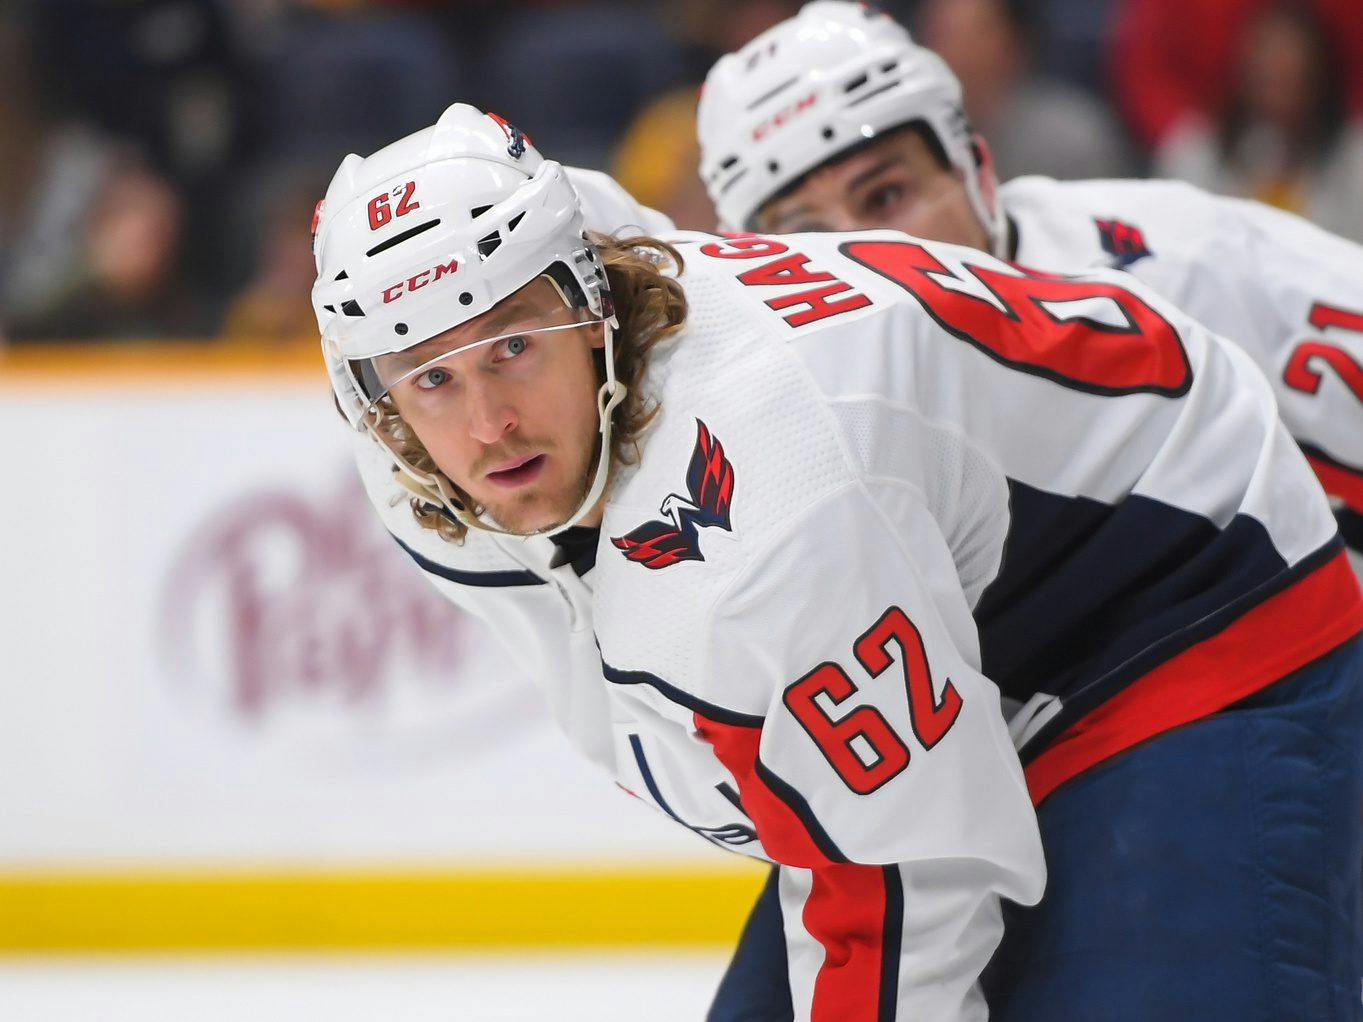 T.J. Oshie out indefinitely with lower-body injury - T.J. Oshie News